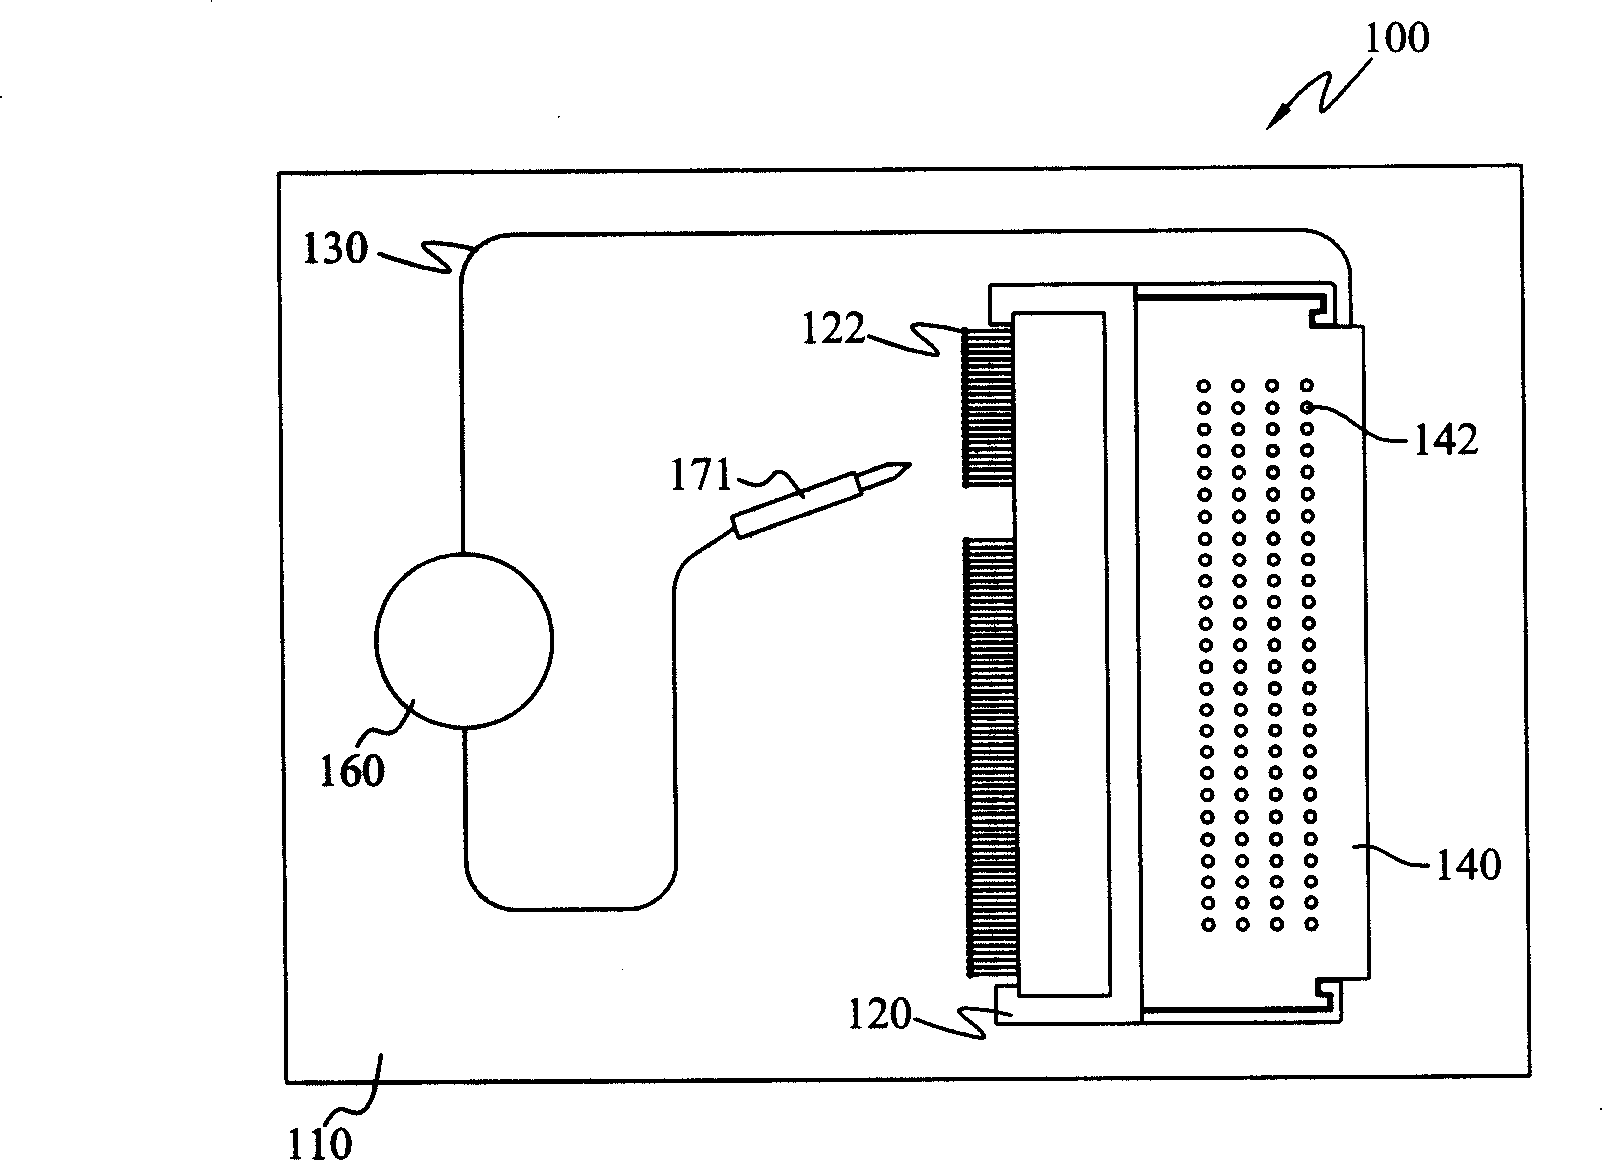 Signal circuit detection device